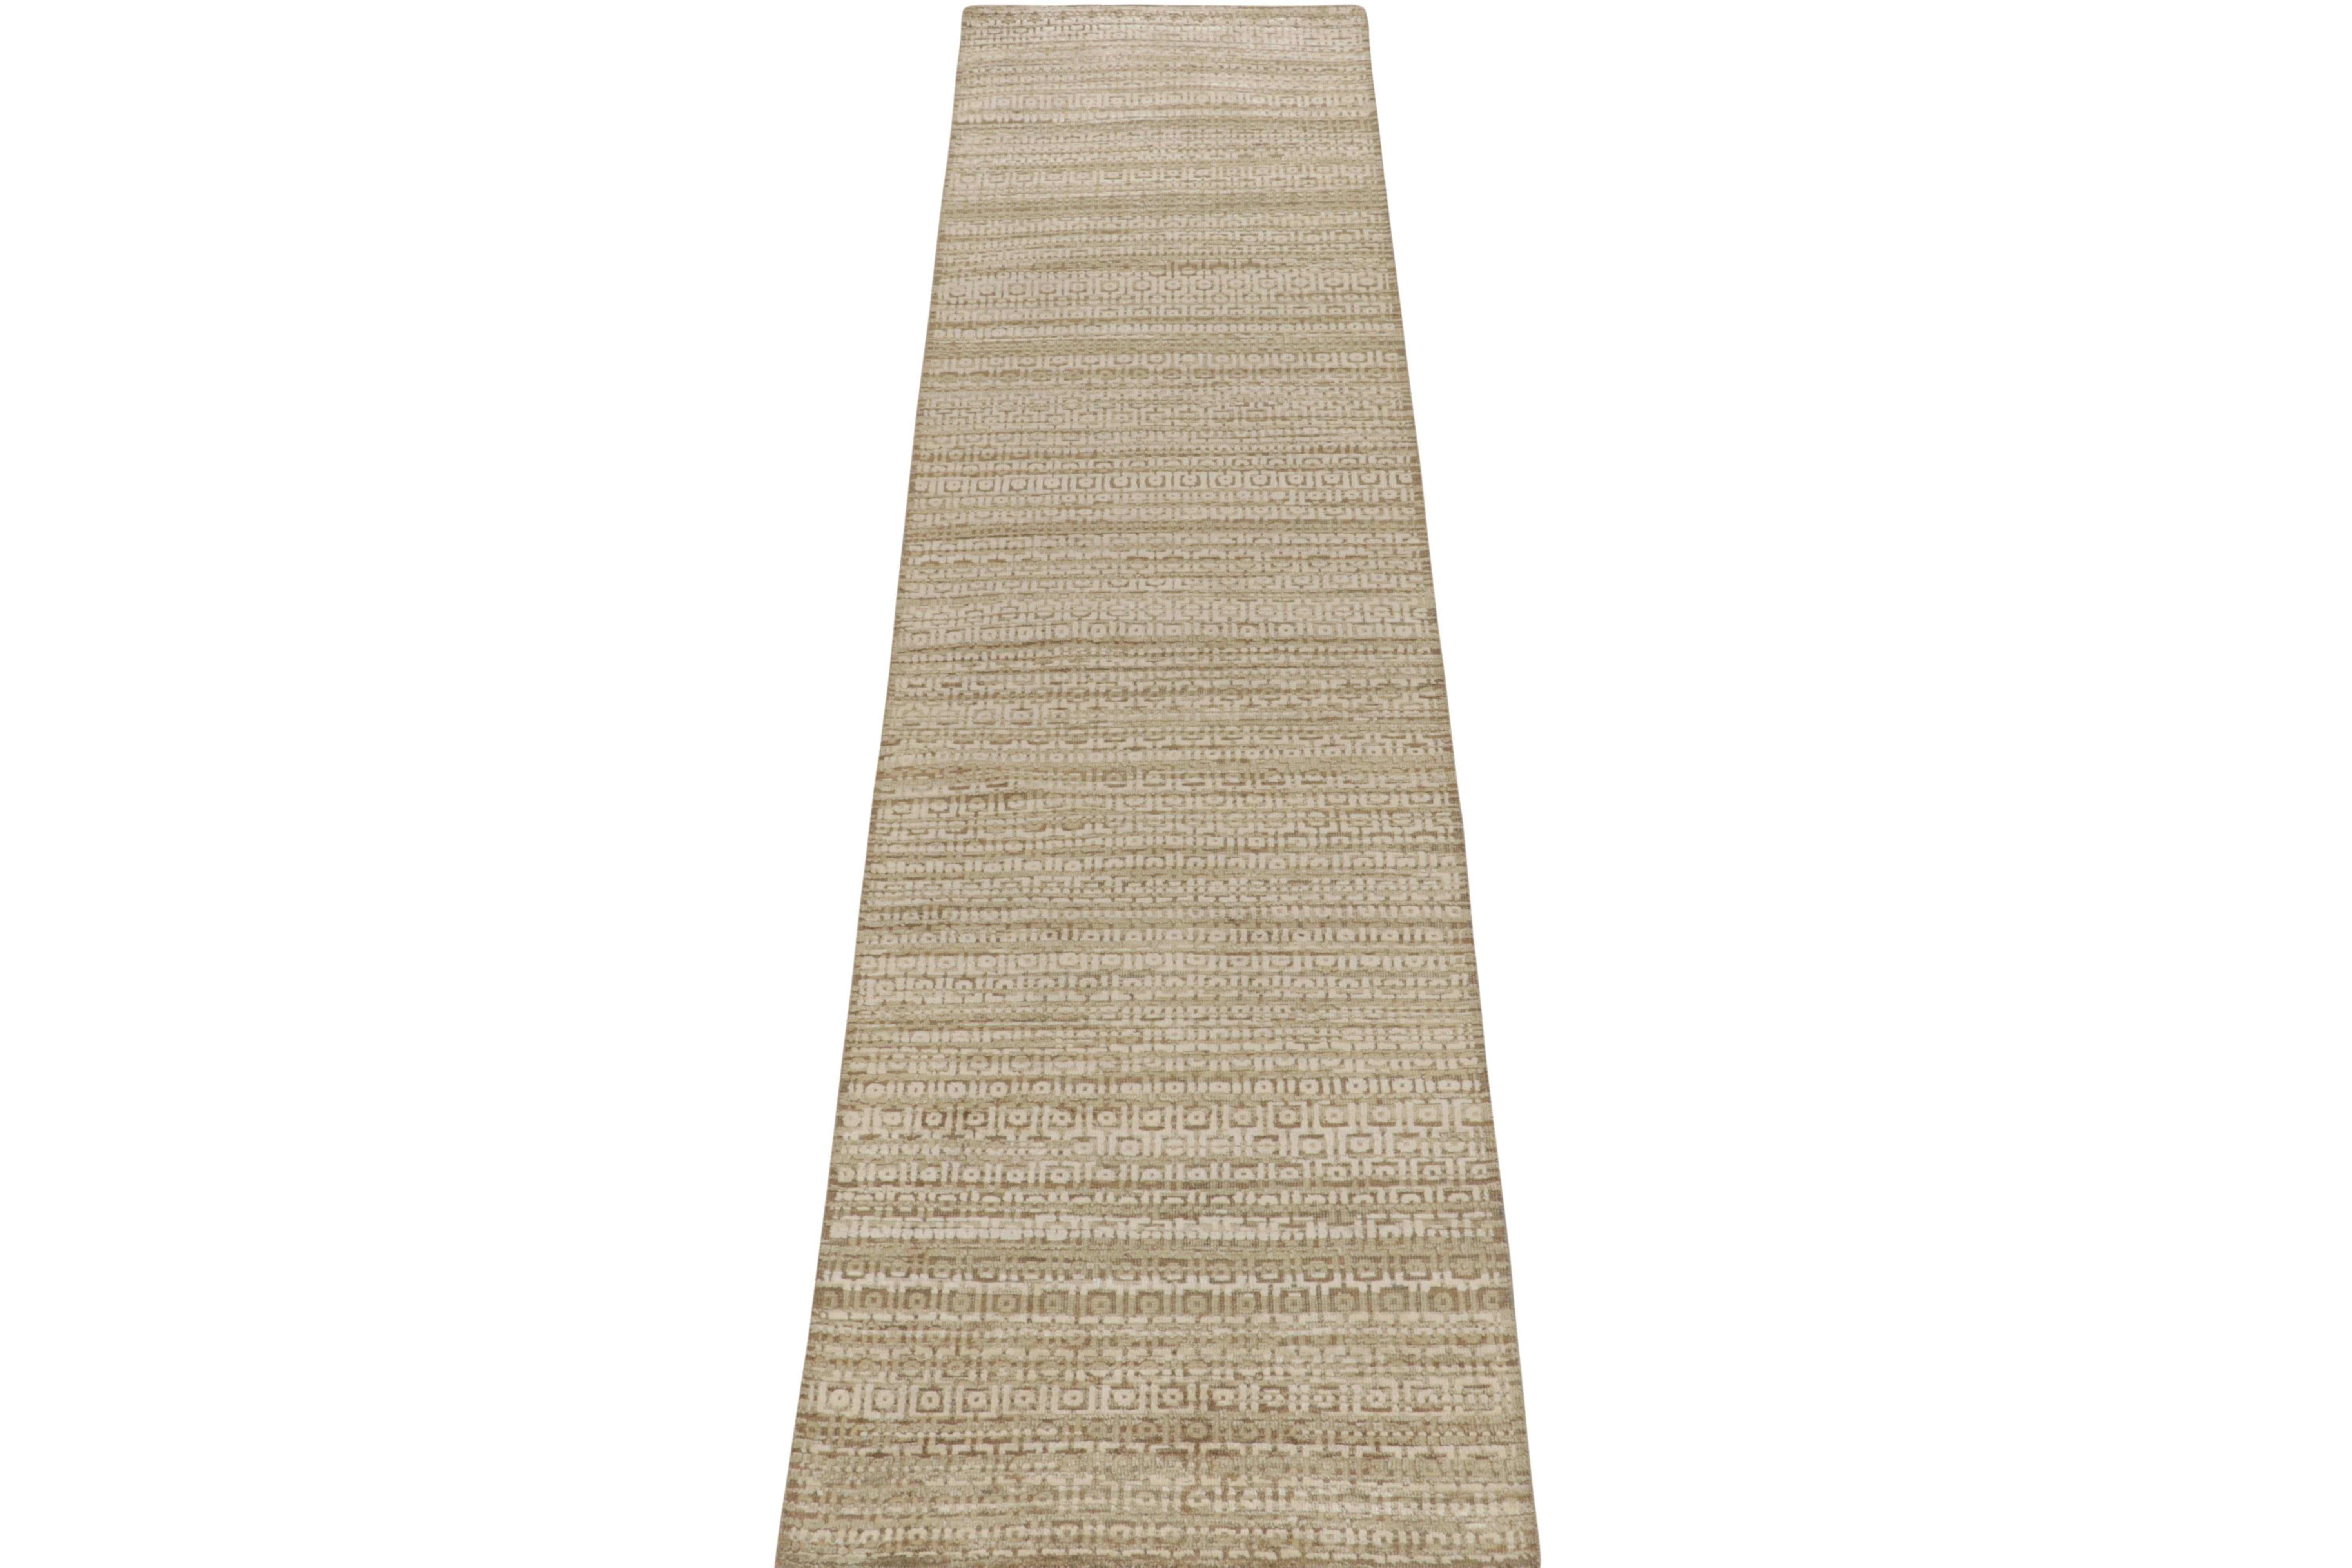 Indian Rug & Kilim’s Modern Textural Runner in Beige-Brown and White Geometric Patterns For Sale